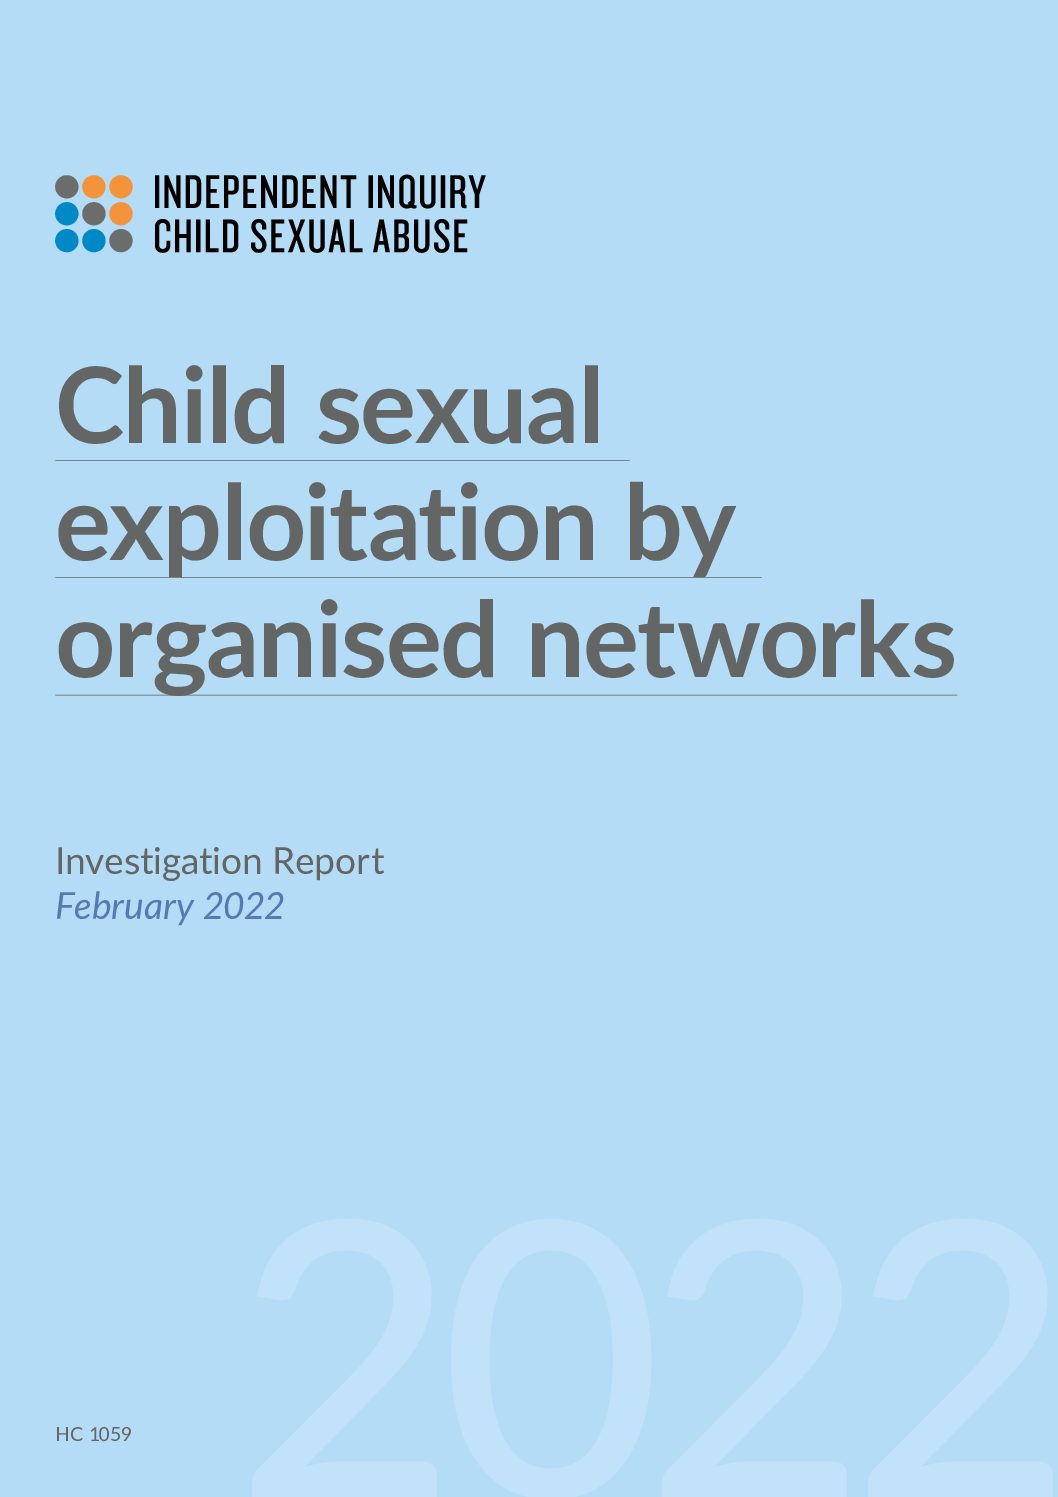 Child Sexual Exploitation by Organised Networks – Investigation Report